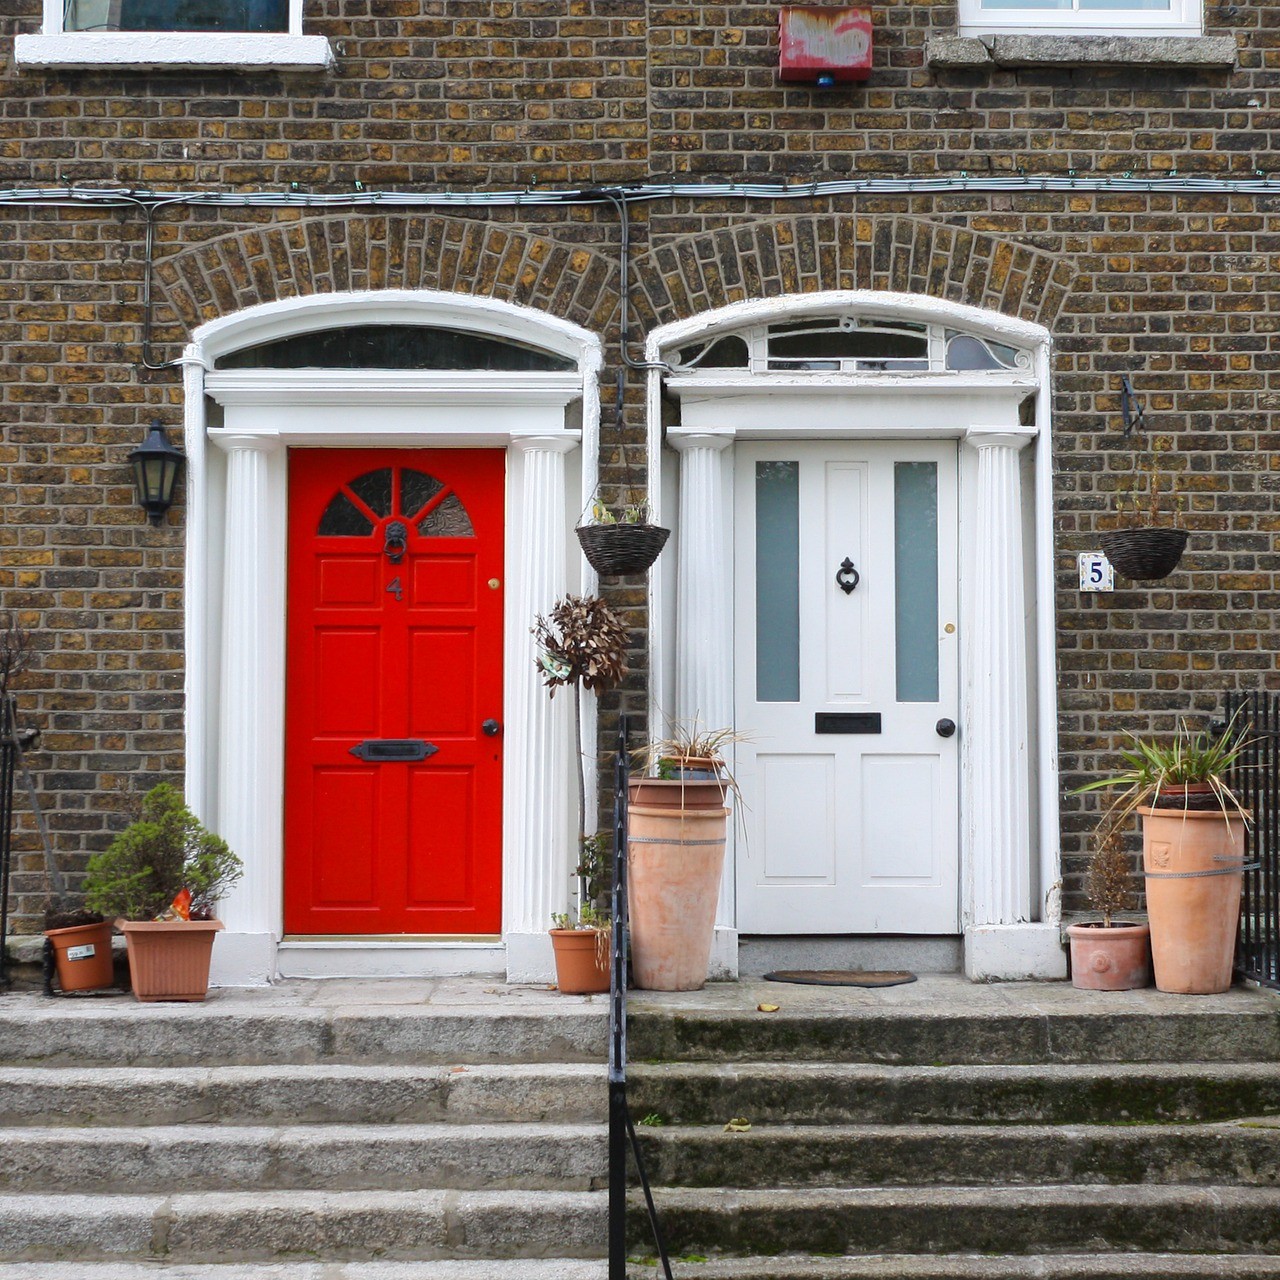 Your accommodation in Ireland can be in traditional houses, with colourful doors like these.